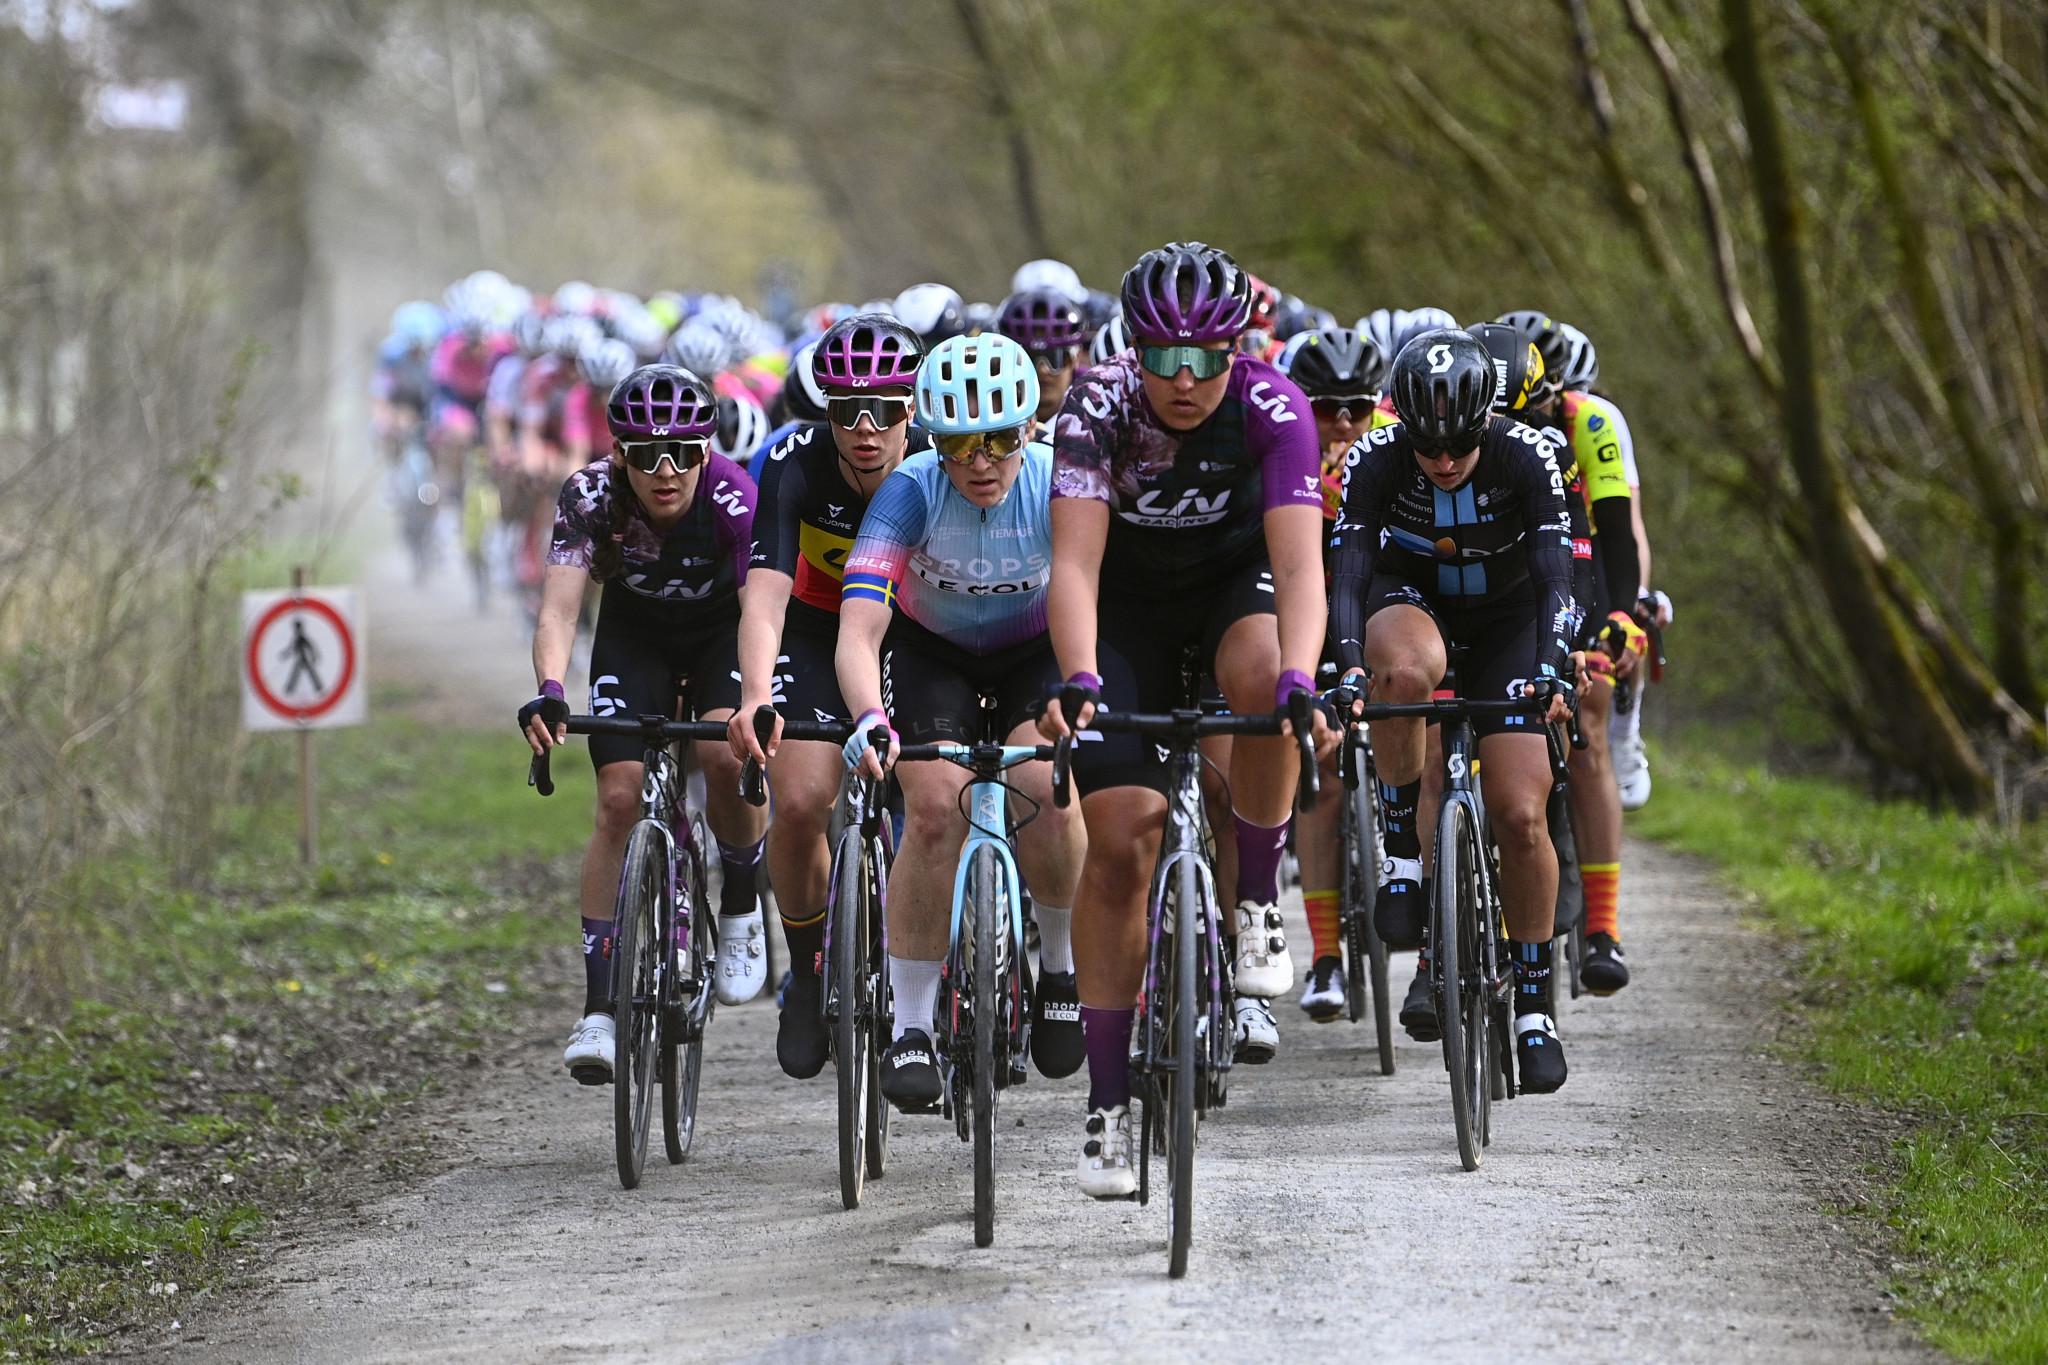 Jackson wins her first Women's WorldTour race in stage one of Holland Ladies Tour